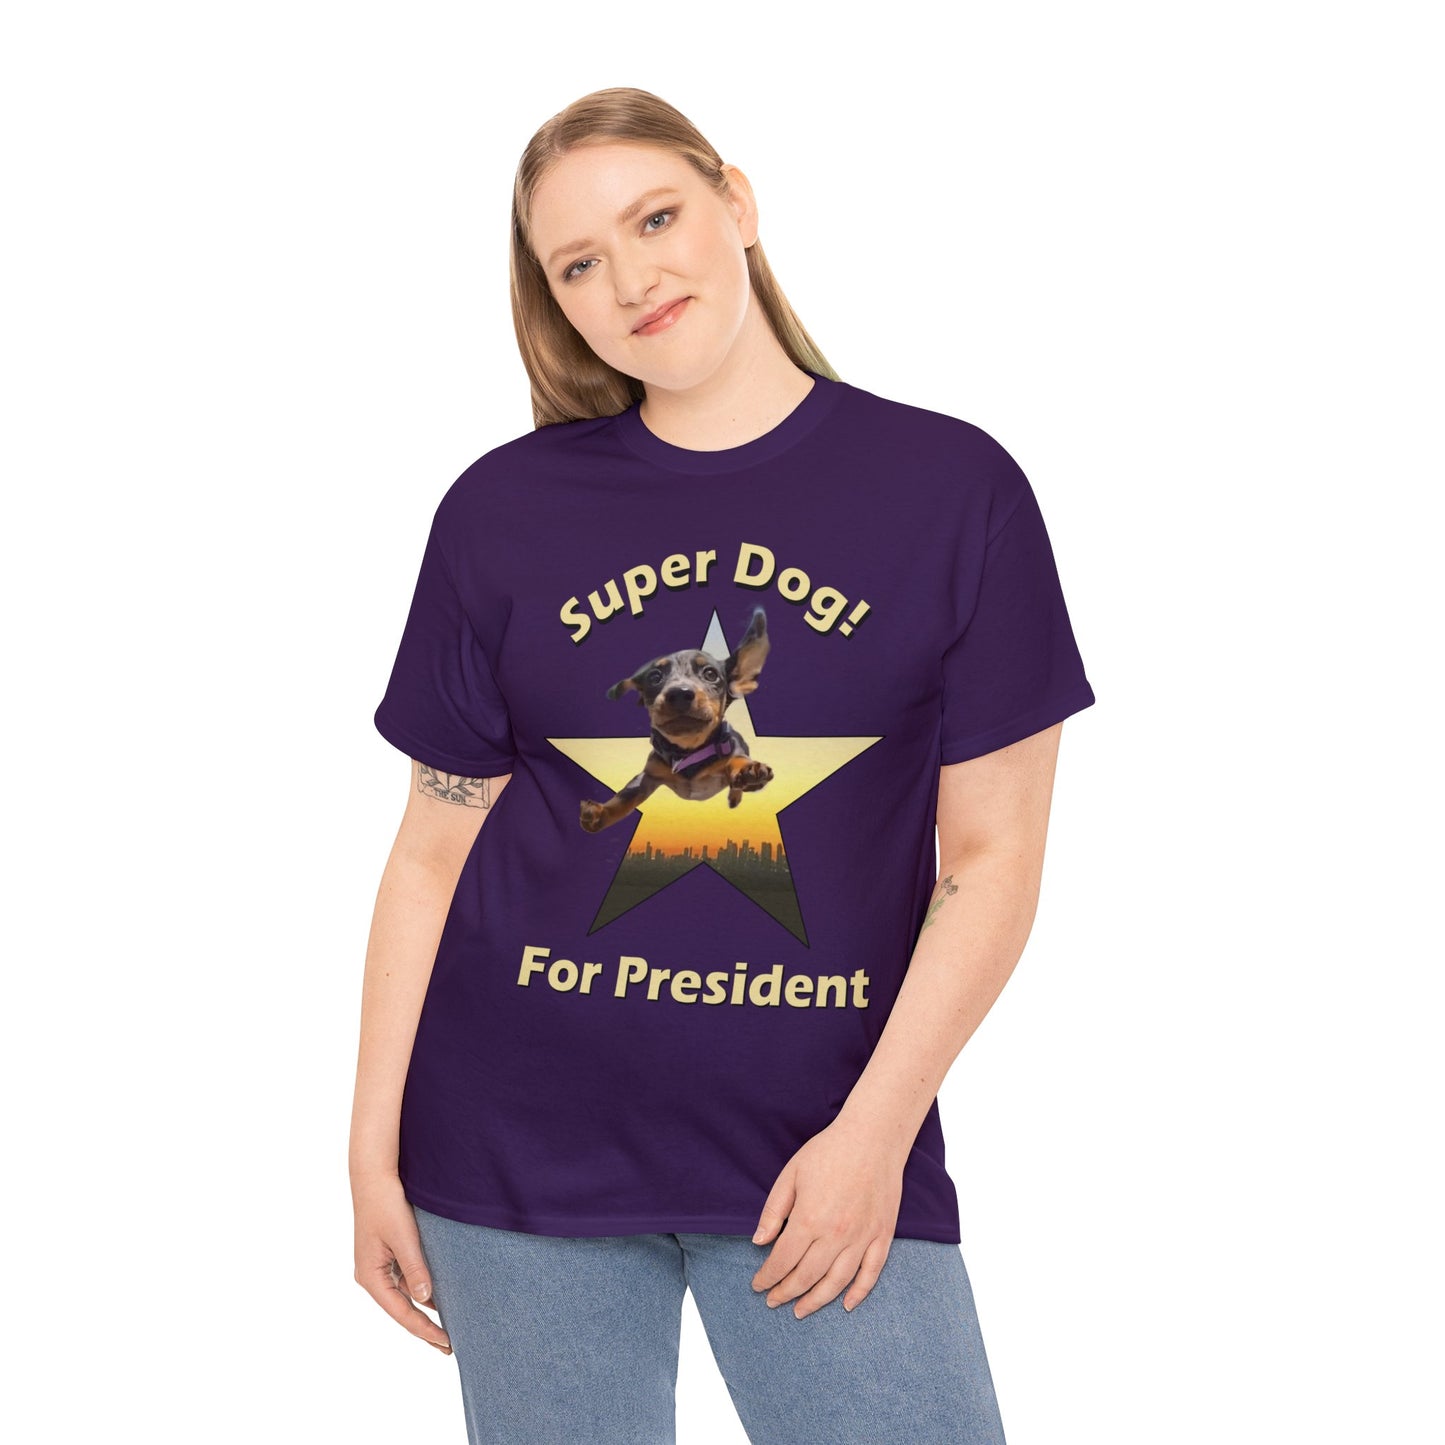 Super Dog for President - Hurts Shirts Collection